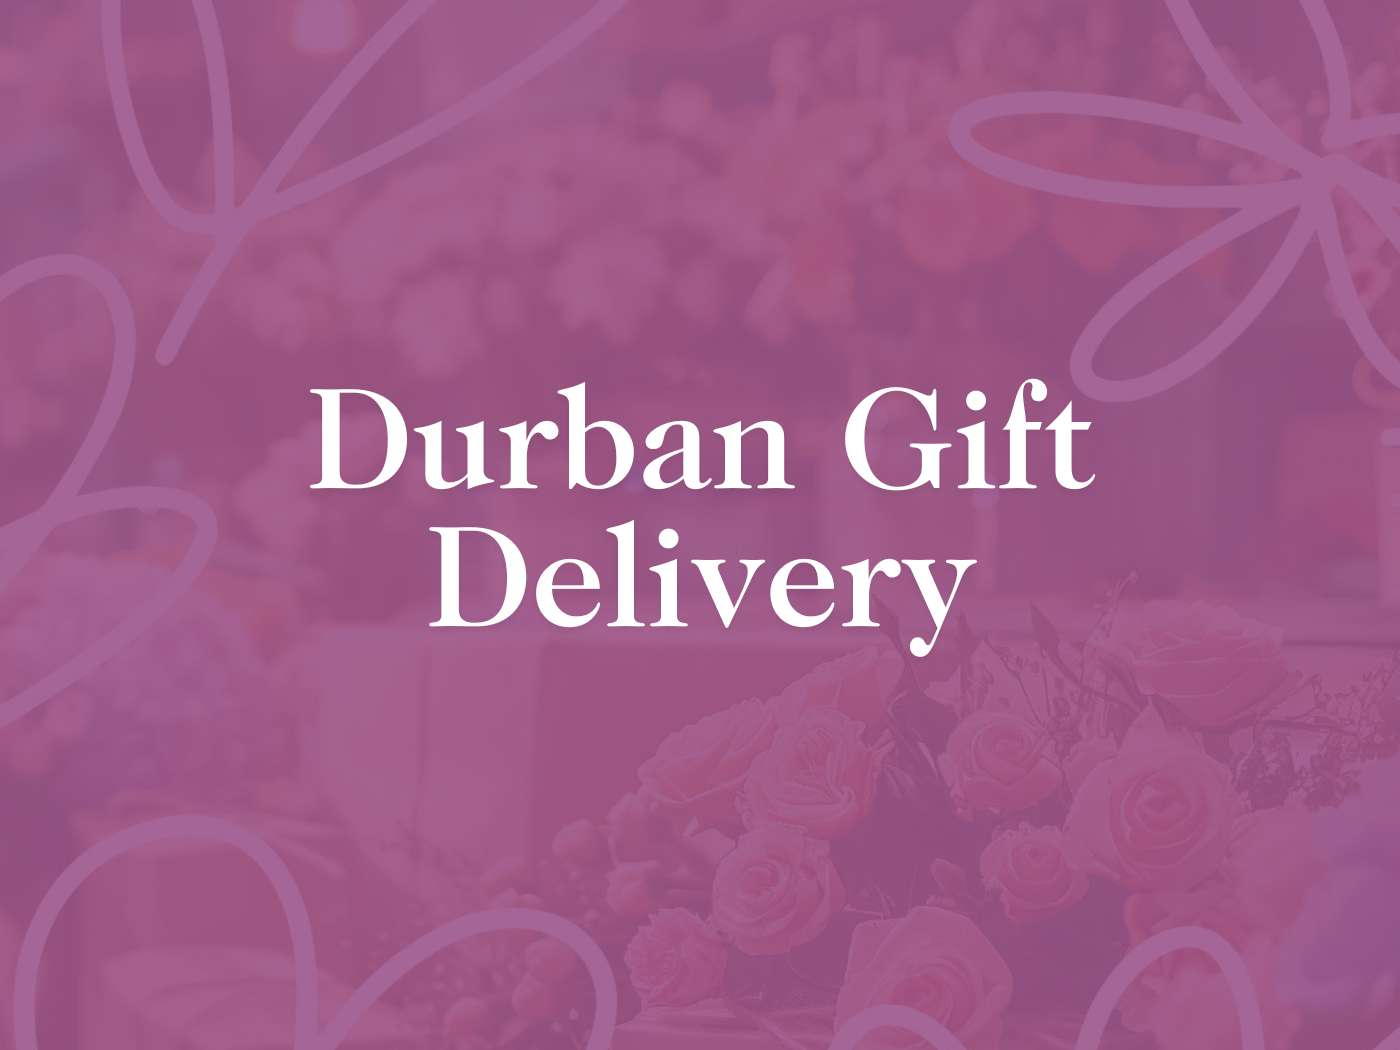 Promotional graphic for Durban Gift Box Delivery Collection, a service by Fabulous Flowers and Gifts.